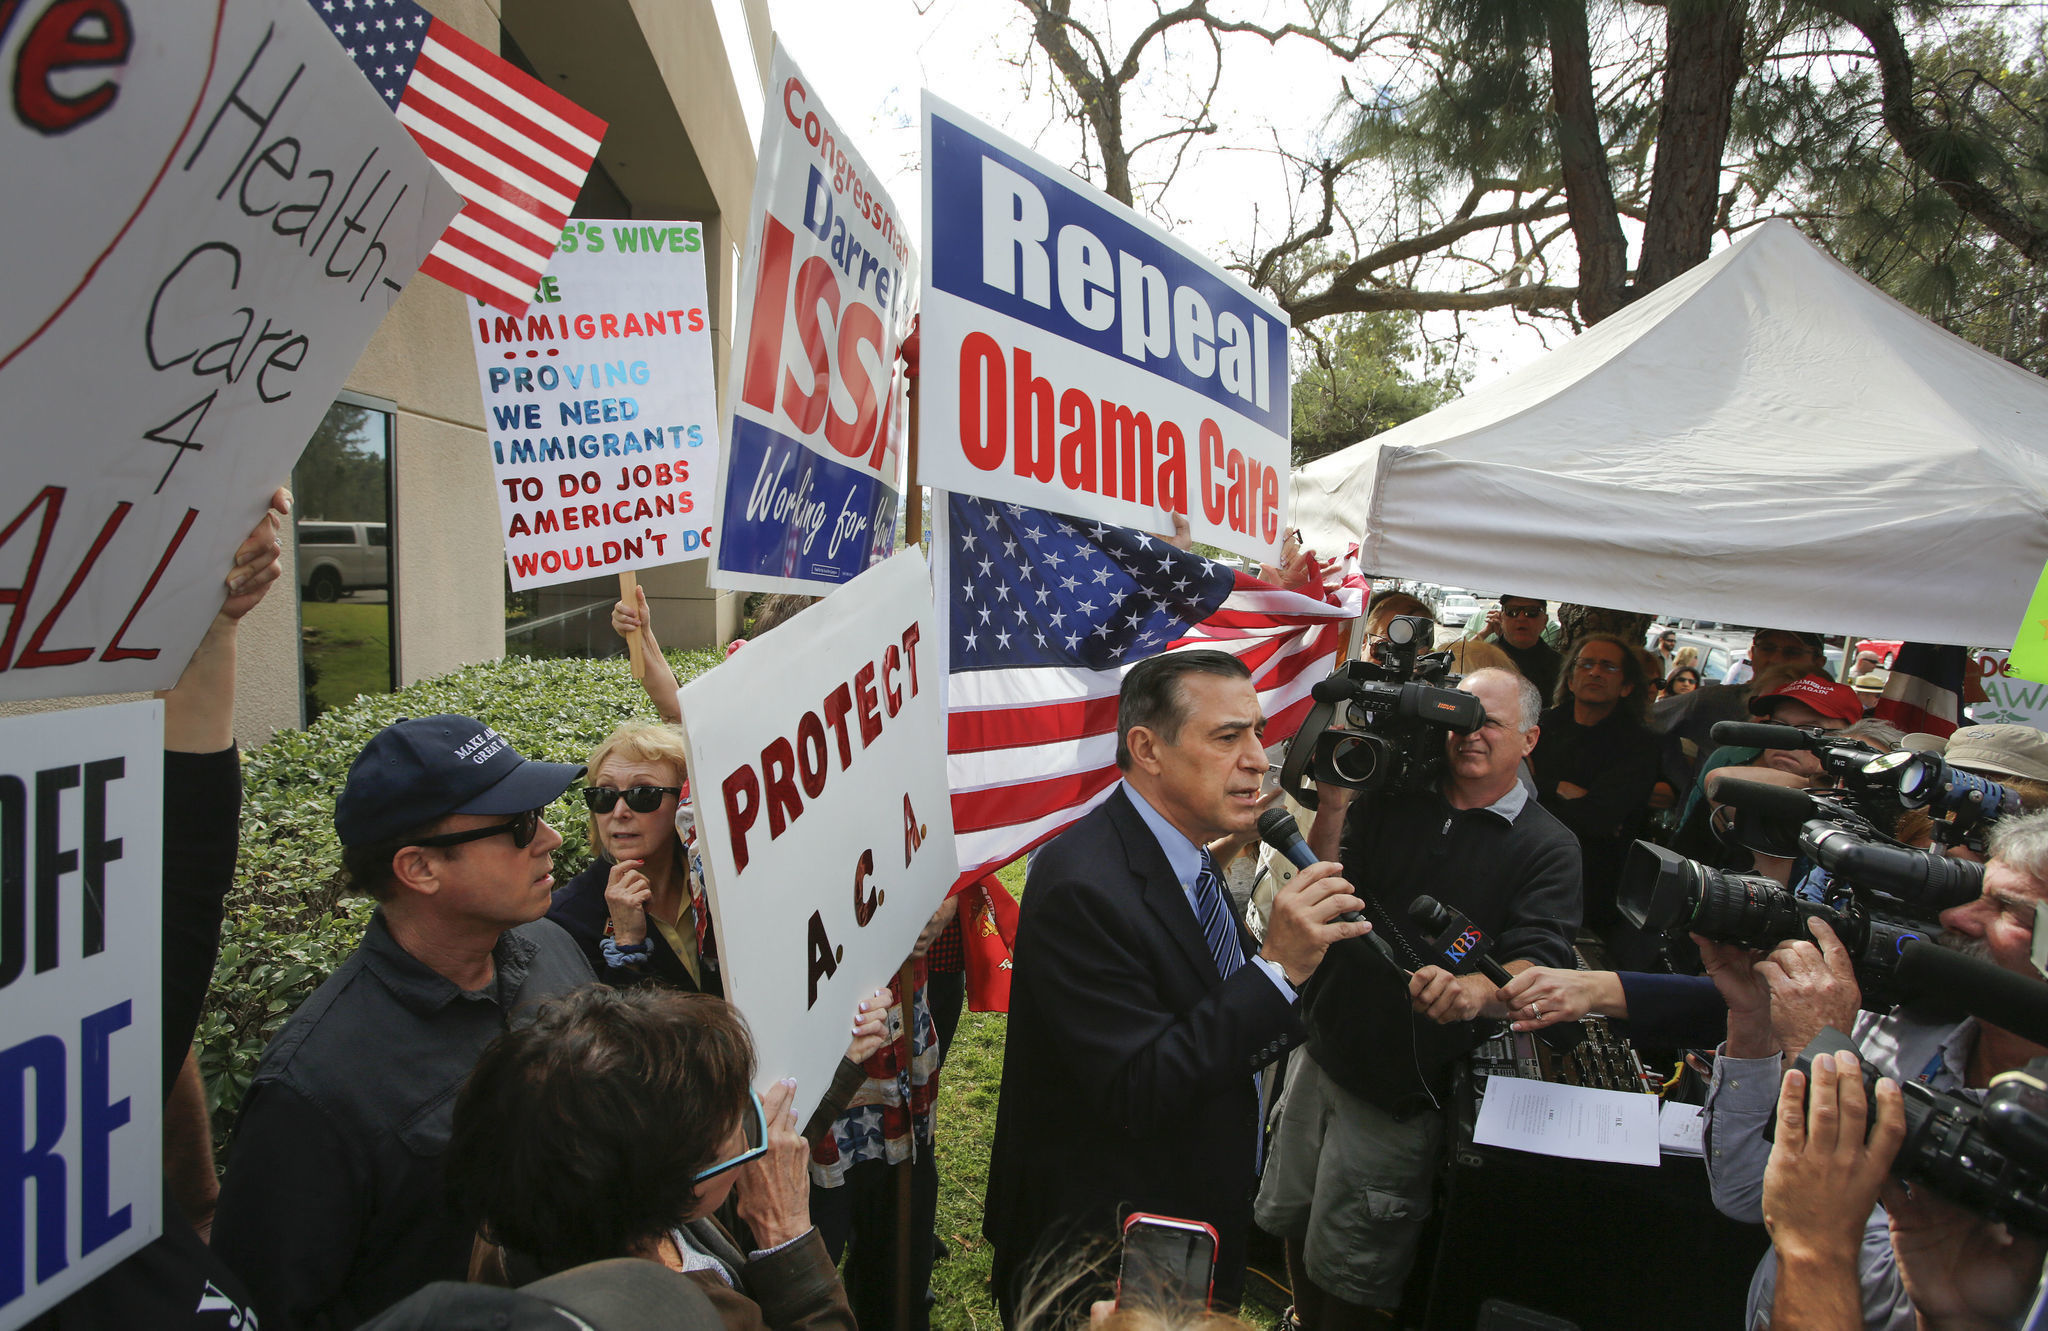 Issa bill to replace Obamacare doesn't address subsidies